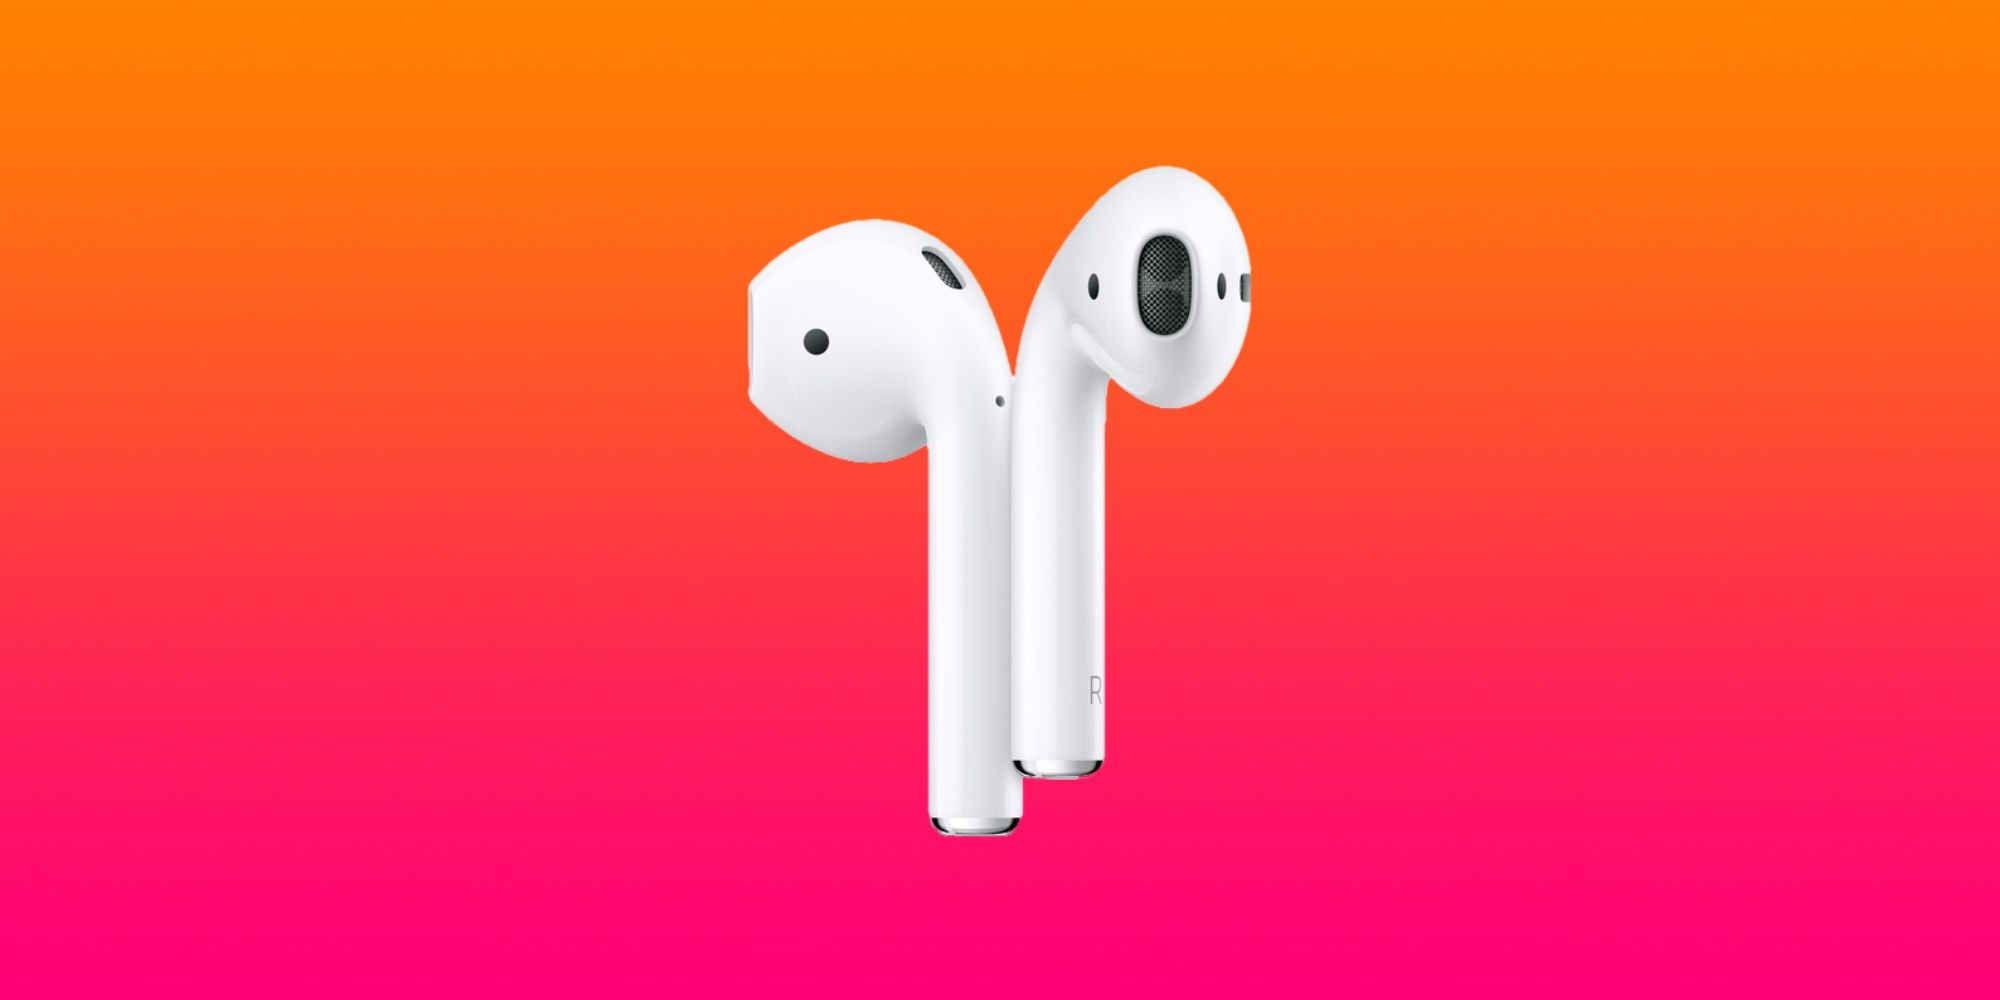 Second-generation AirPods over a pink and orange gradient background.